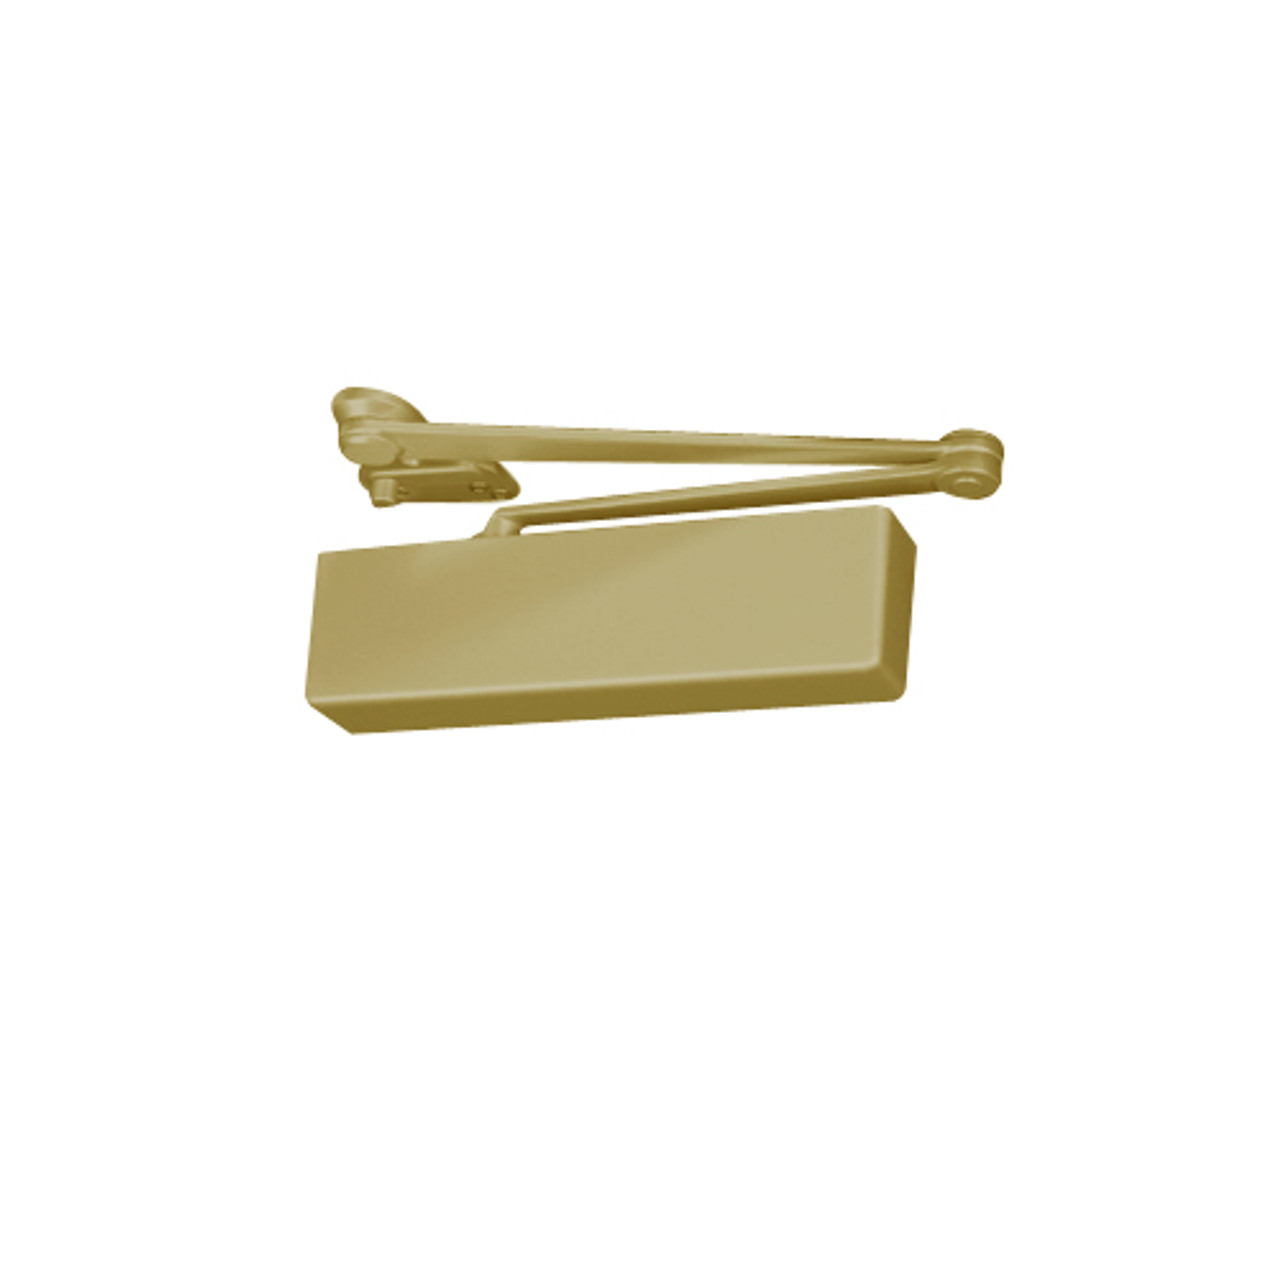 CLP7500TM-696 Norton 7500 Series Hold Open Institutional Door Closer with CloserPlus Arm in Gold Finish